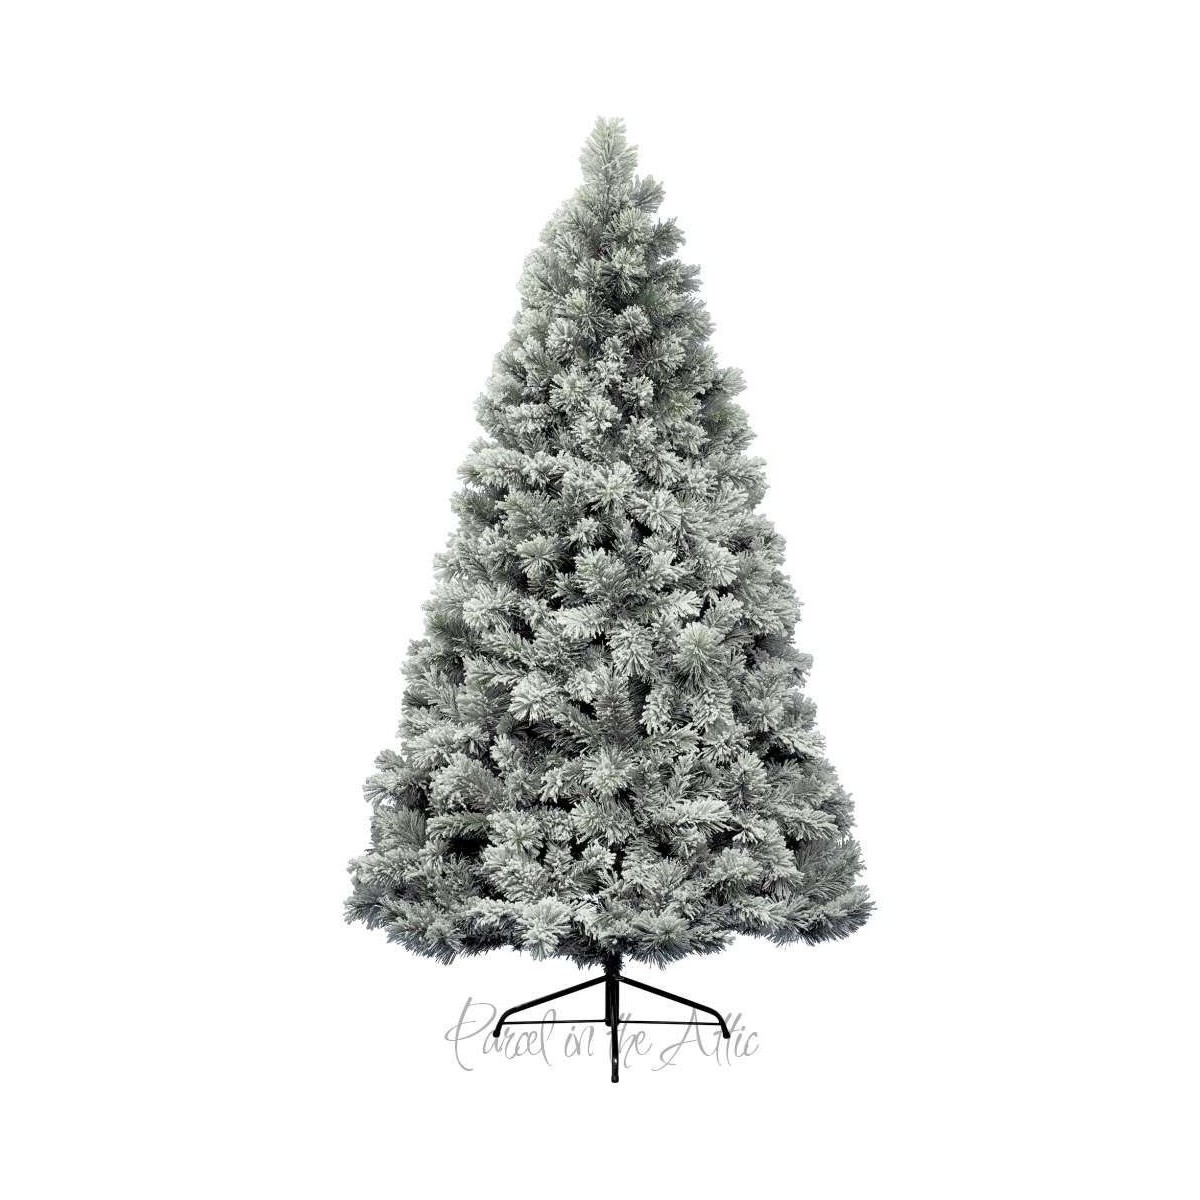 120cm/4ft  Exclusive Snowy Mixed Pine Artificial Christmas Tree